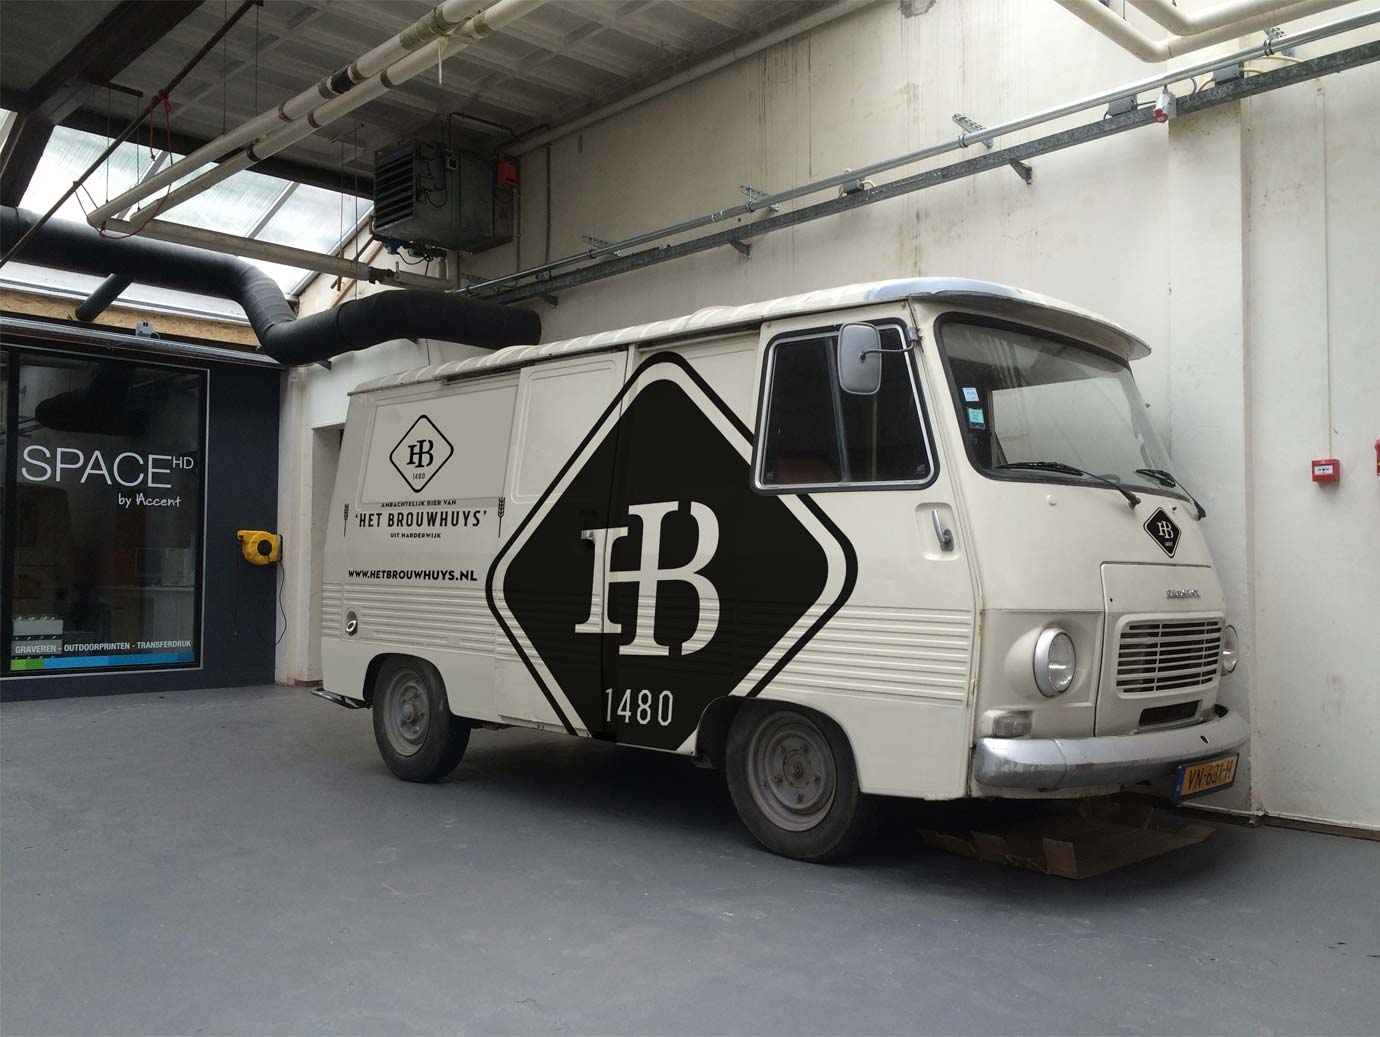 mockup of bus with brouwhuys logo